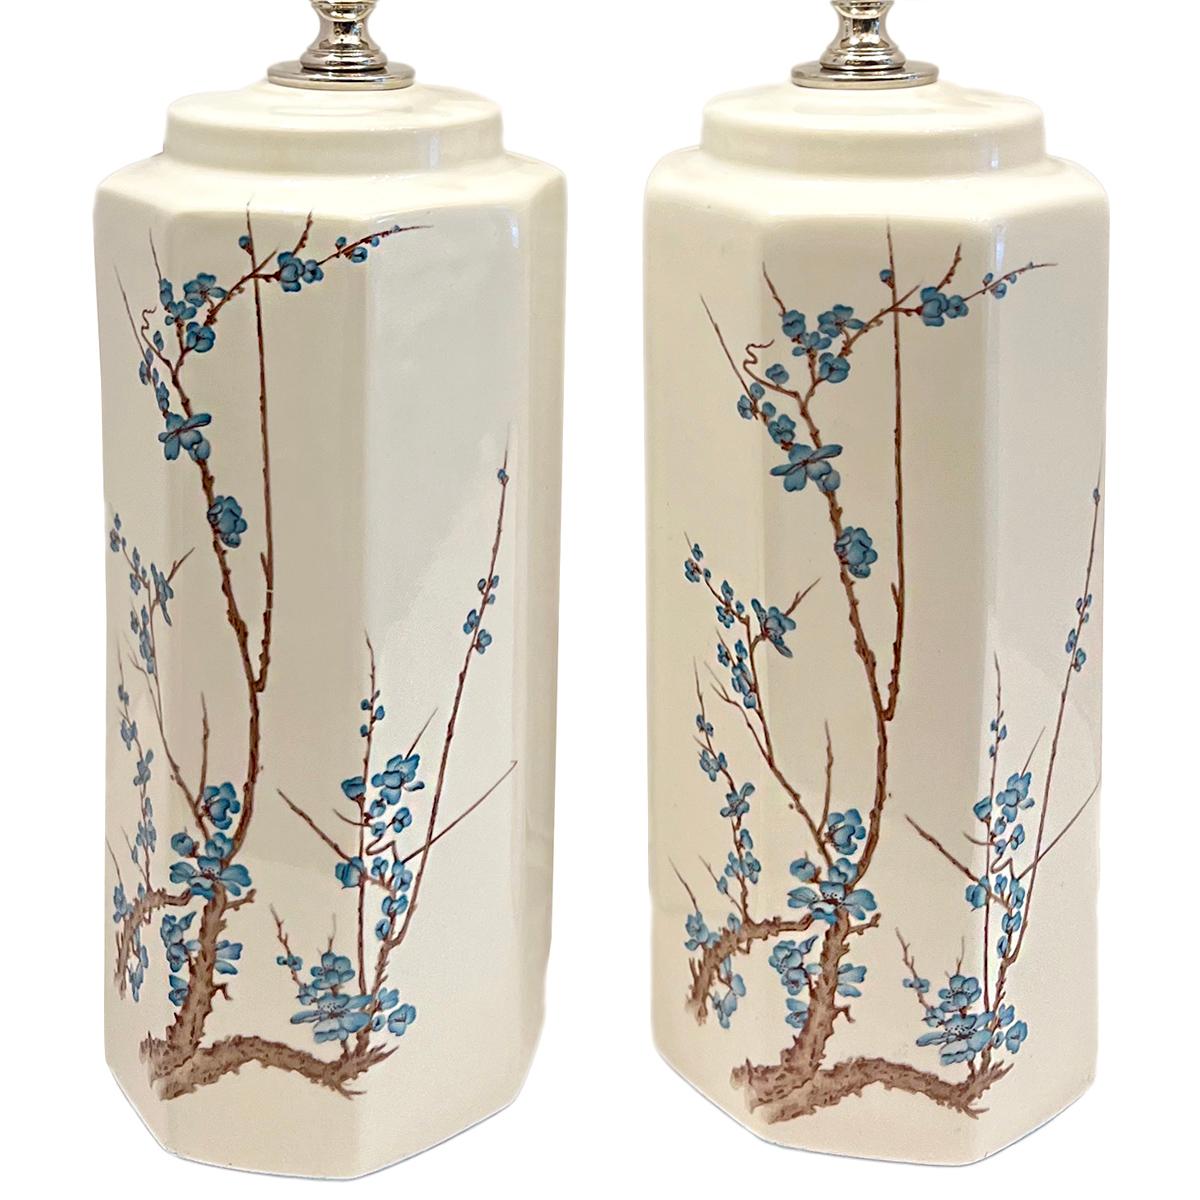 Pair of 1950s Italian Chinoiserie style table lamps.

Measurements:
Height of body: 11